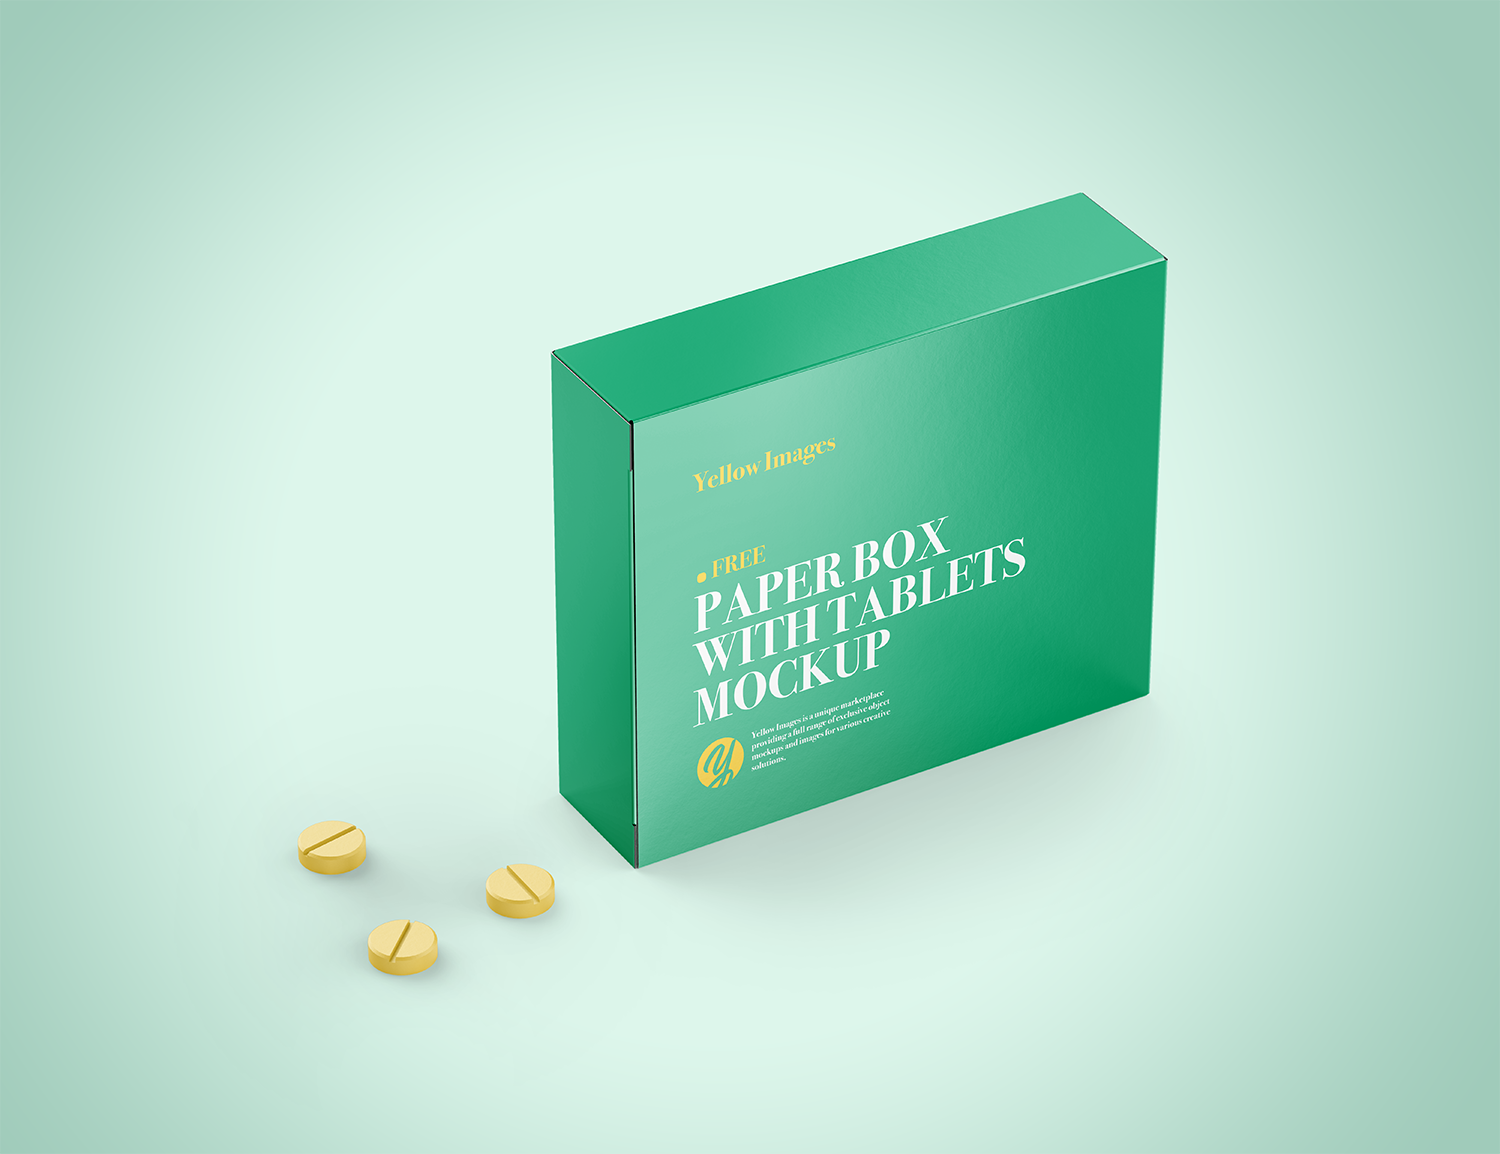 Download Paper Box With Tablets Mockup Free Mockup Yellowimages Mockups